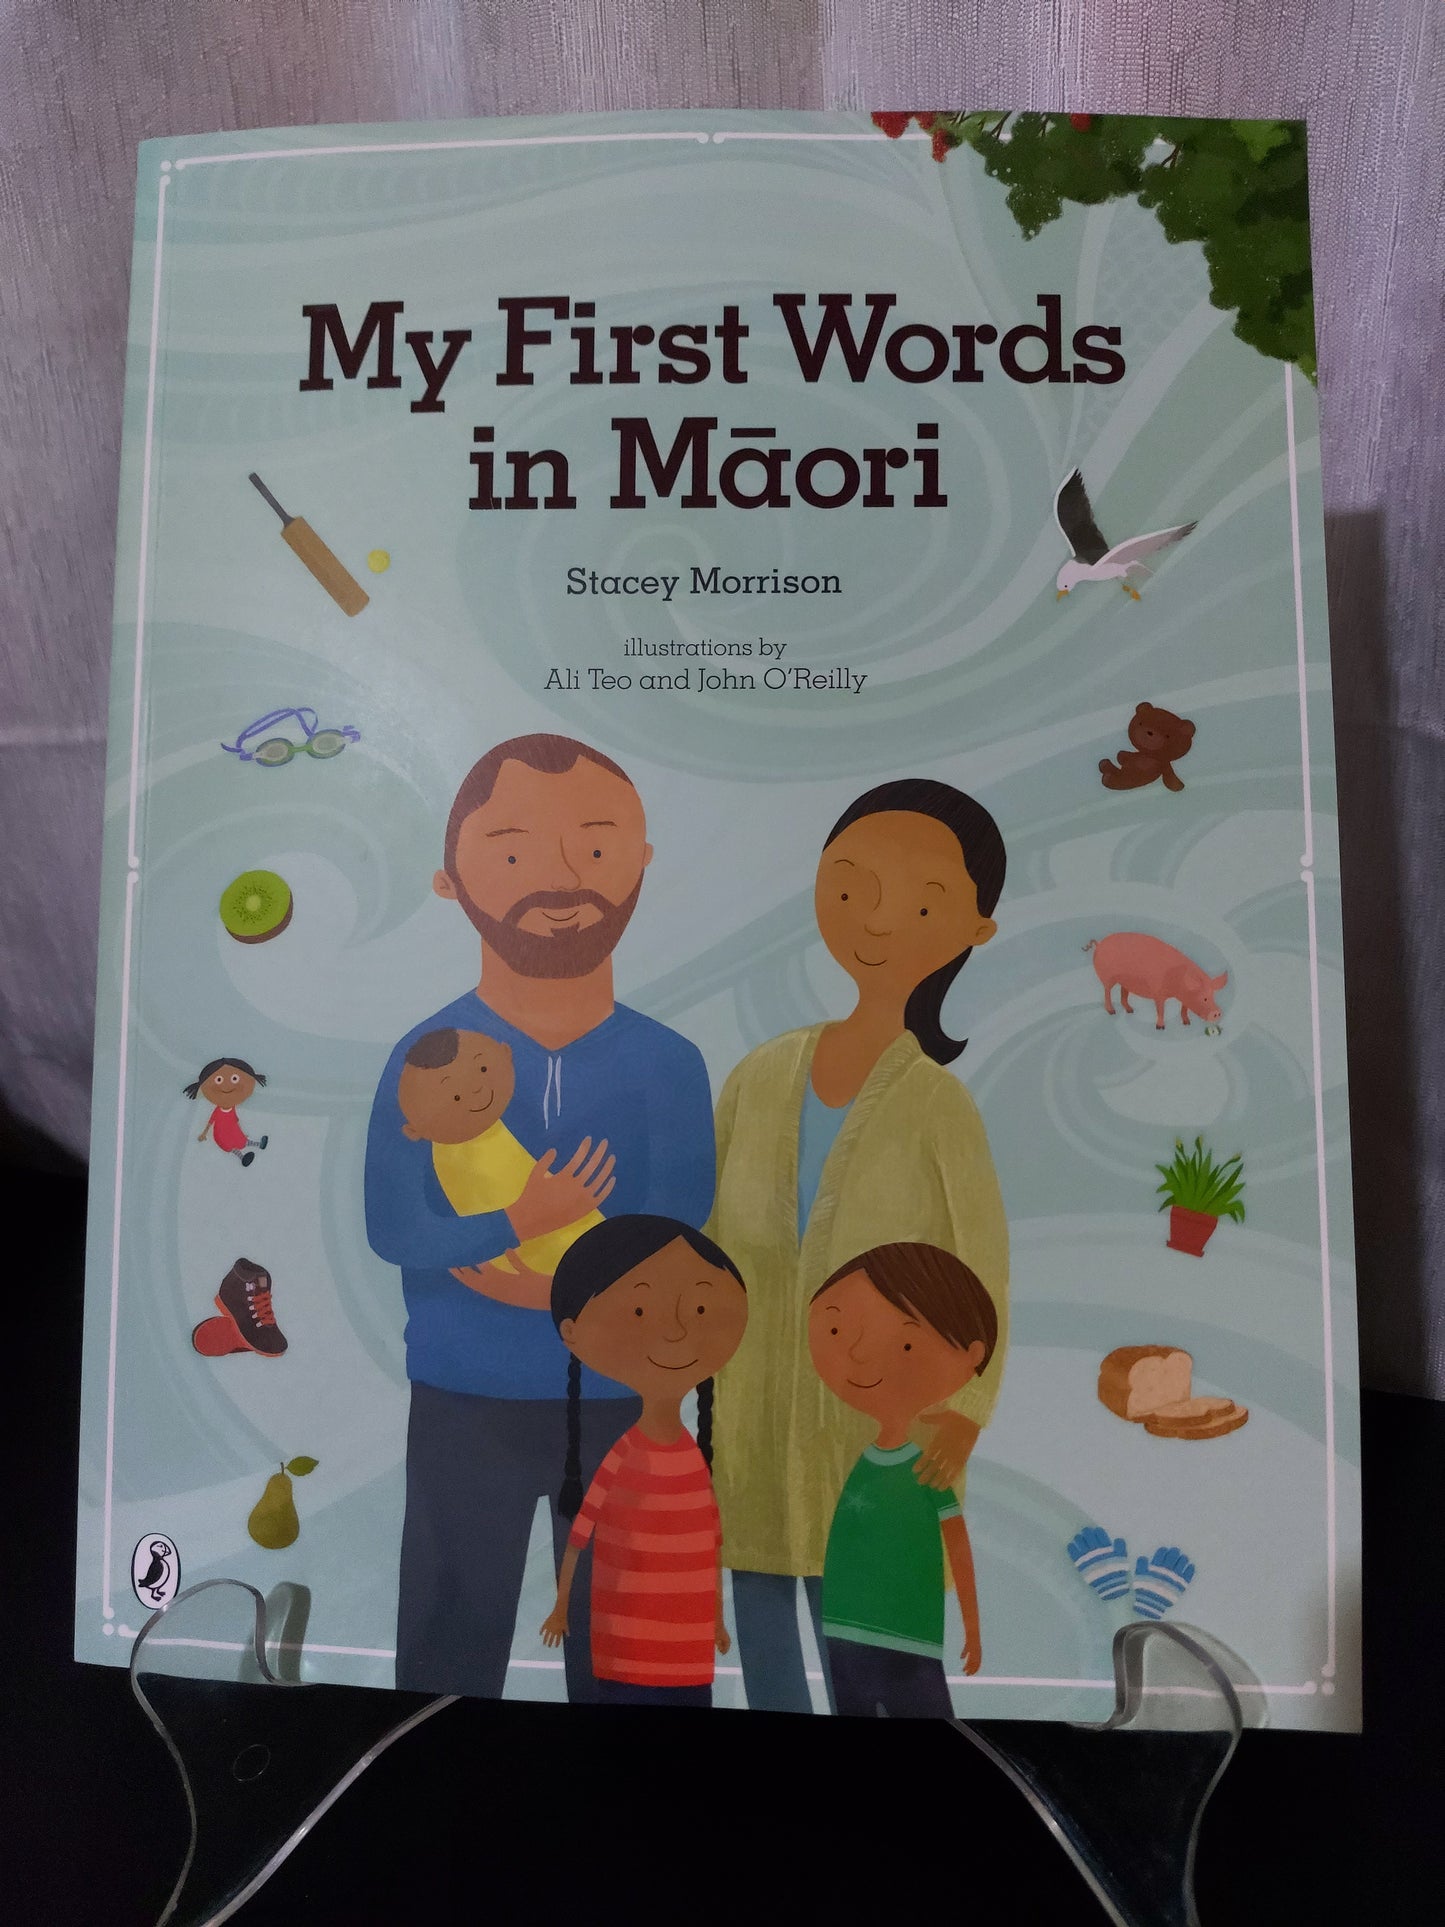 My First Words in Maori by Stacey Morrison